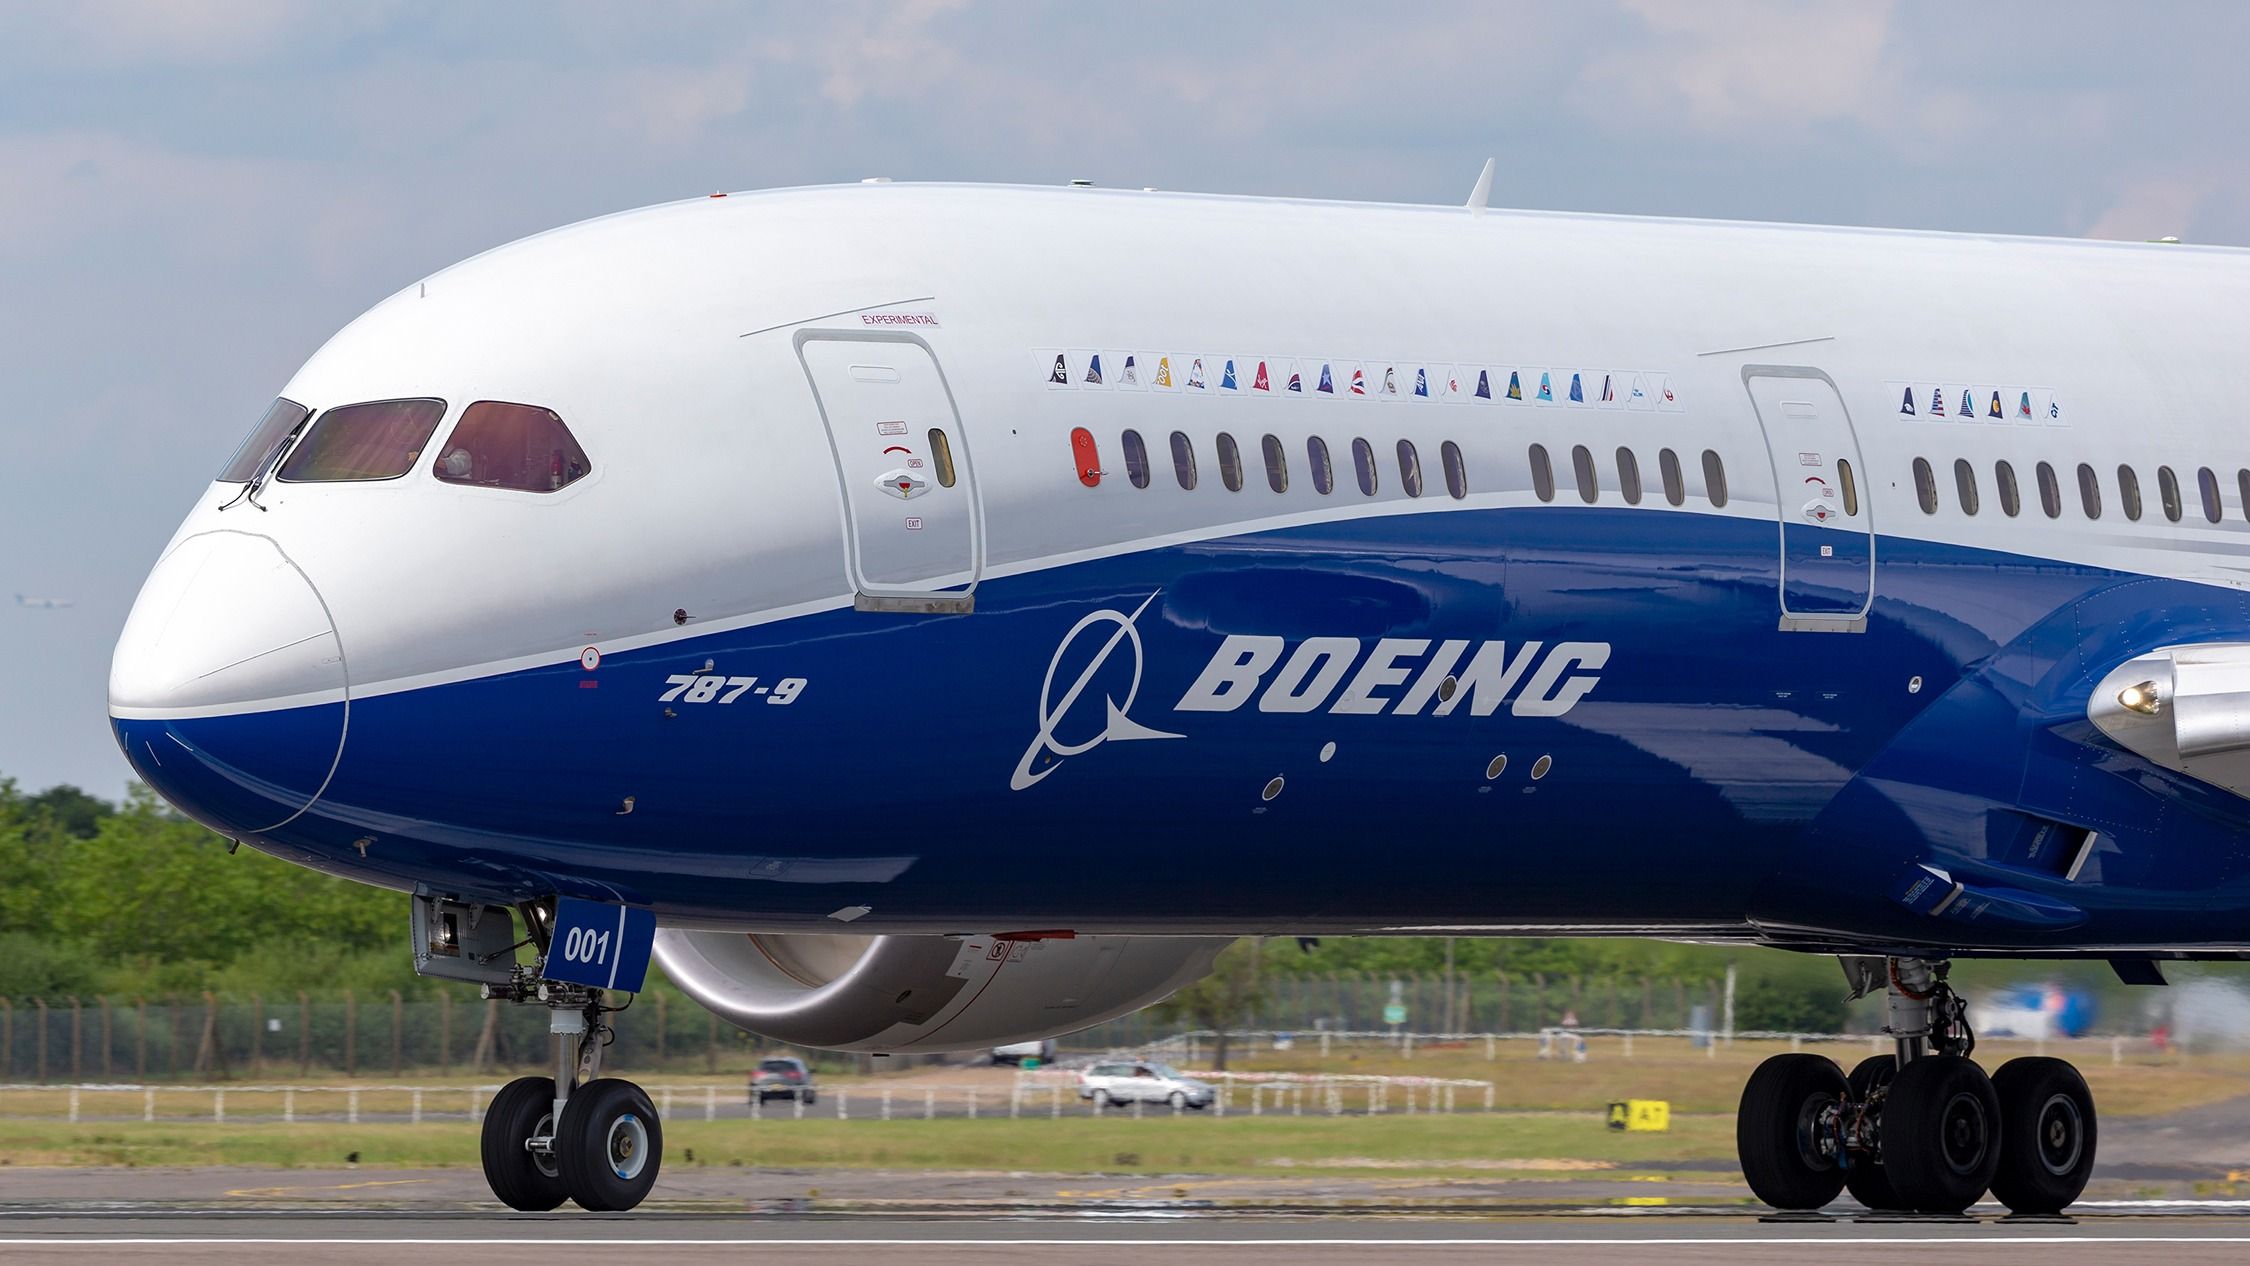 Boeing 787 in the manufacturer's livery at the Farnborough International Airshow 2014 shutterstock_1258445287